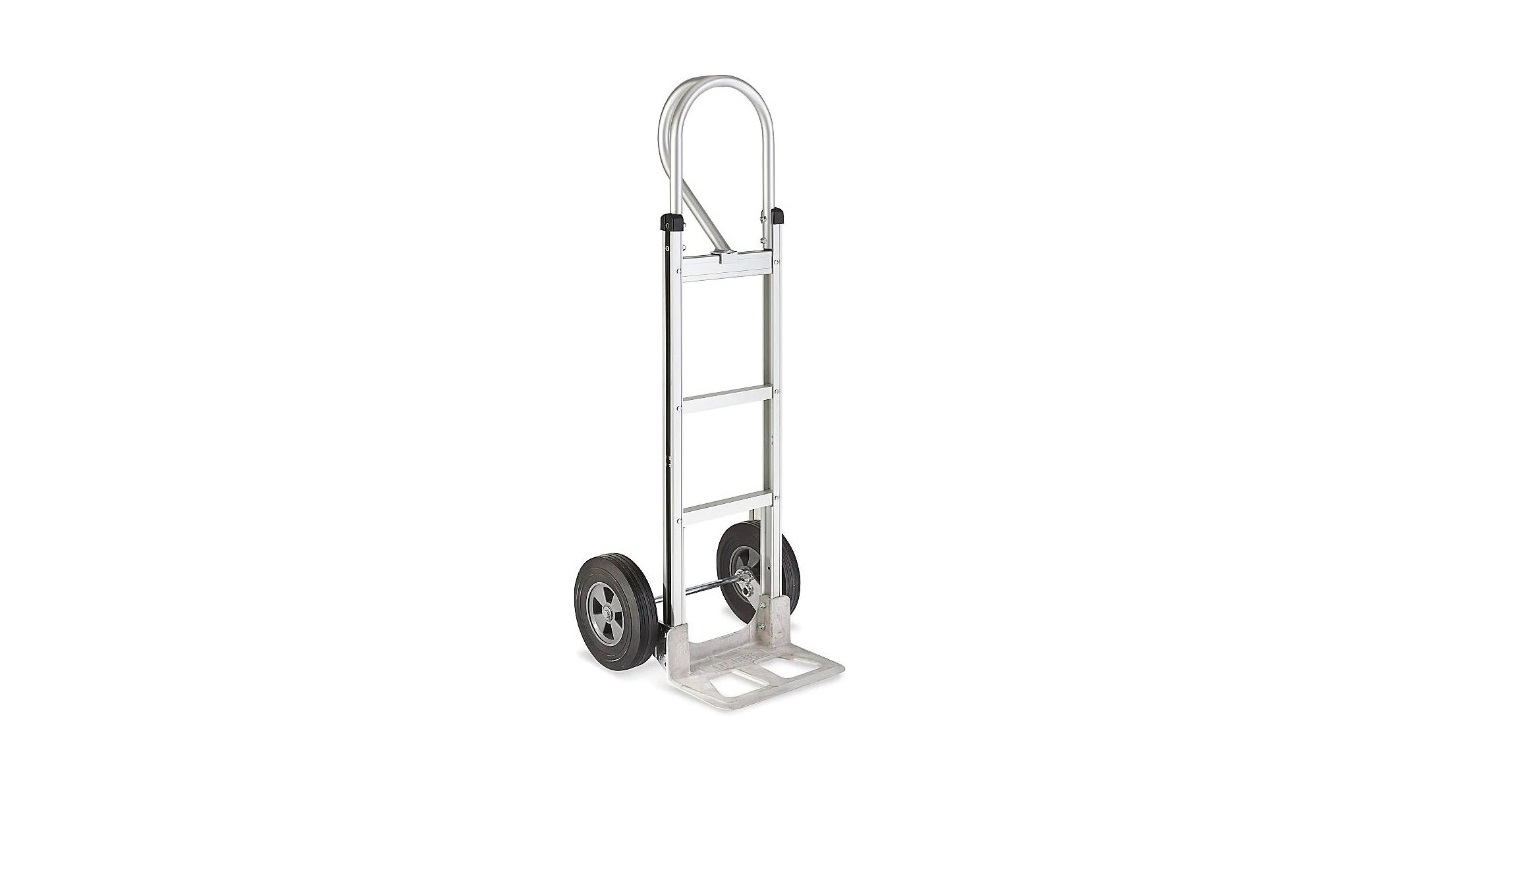 ULINE H-3199 Aluminum Standard Hand Truck with Extra-Large Noseplate and Solid Rubber Wheels Installation Guide